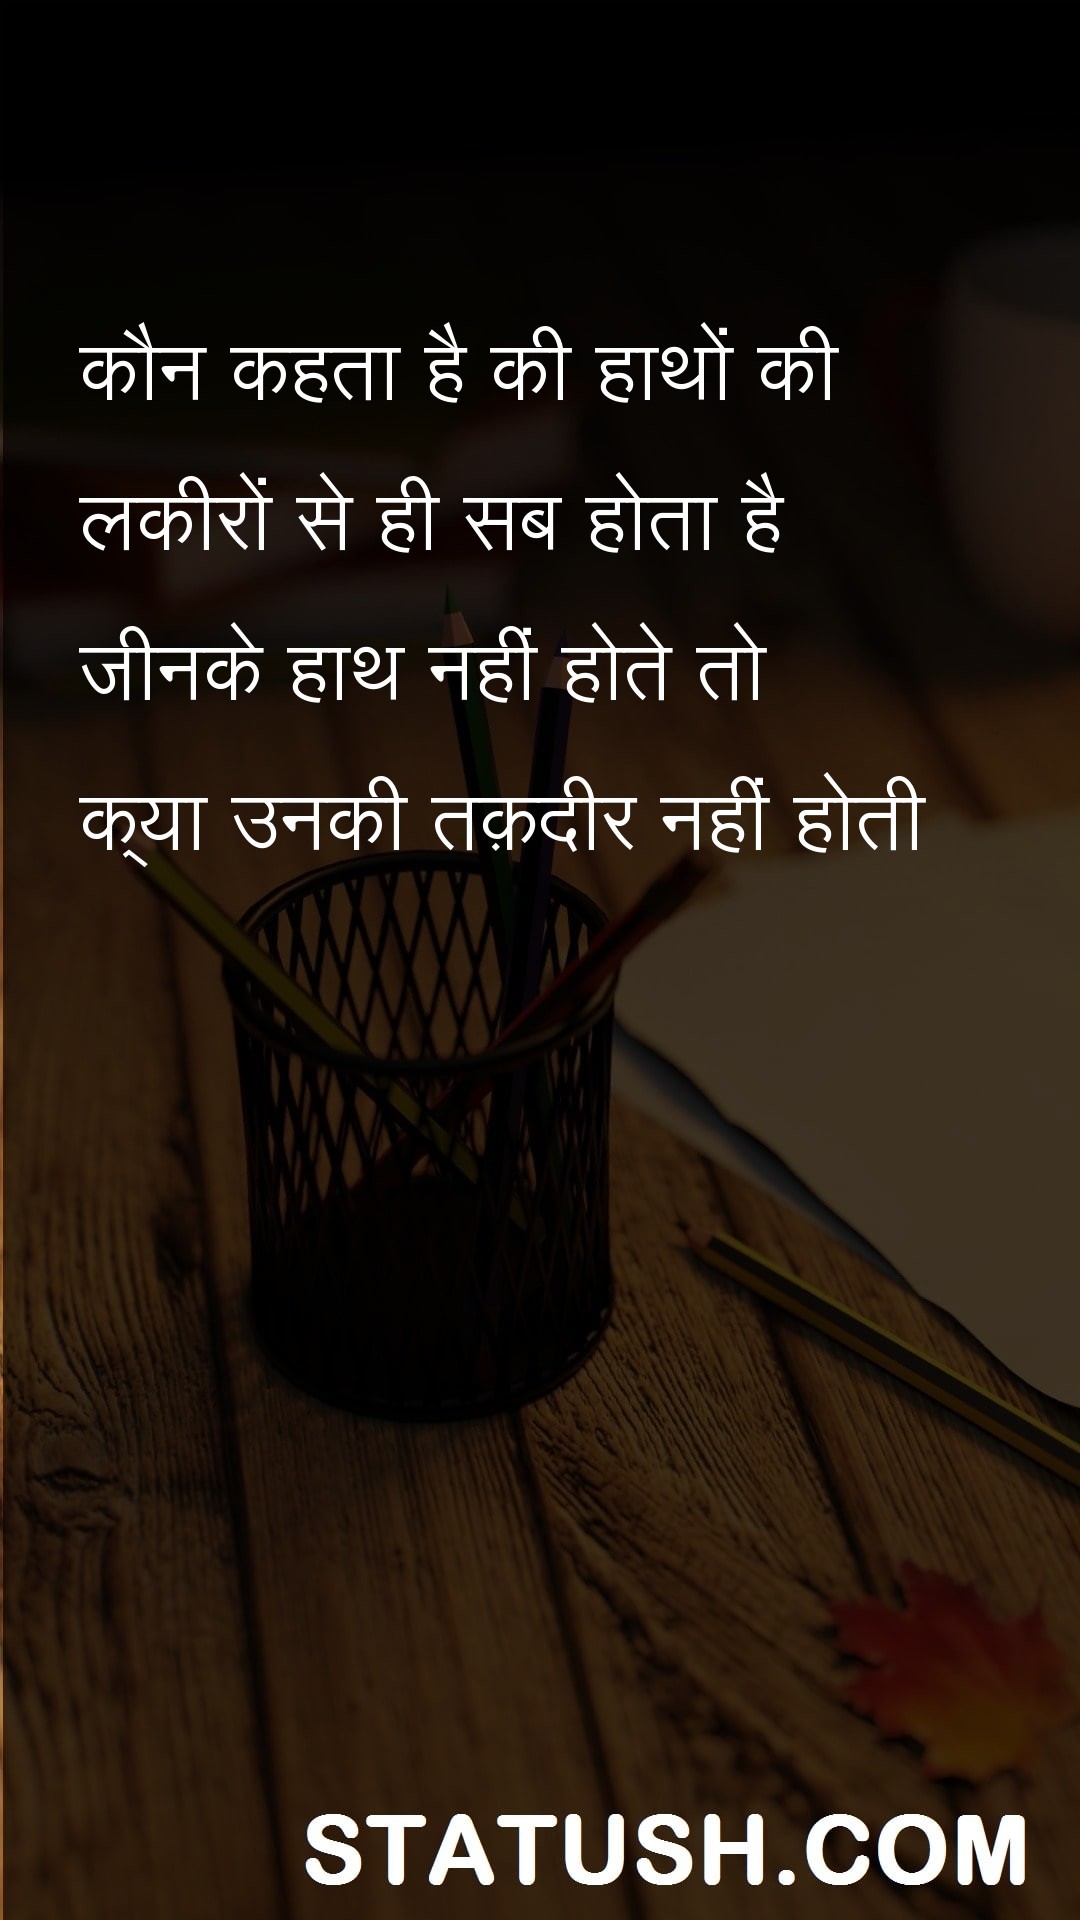 Who says that everything happens - Hindi Quotes at statush.com